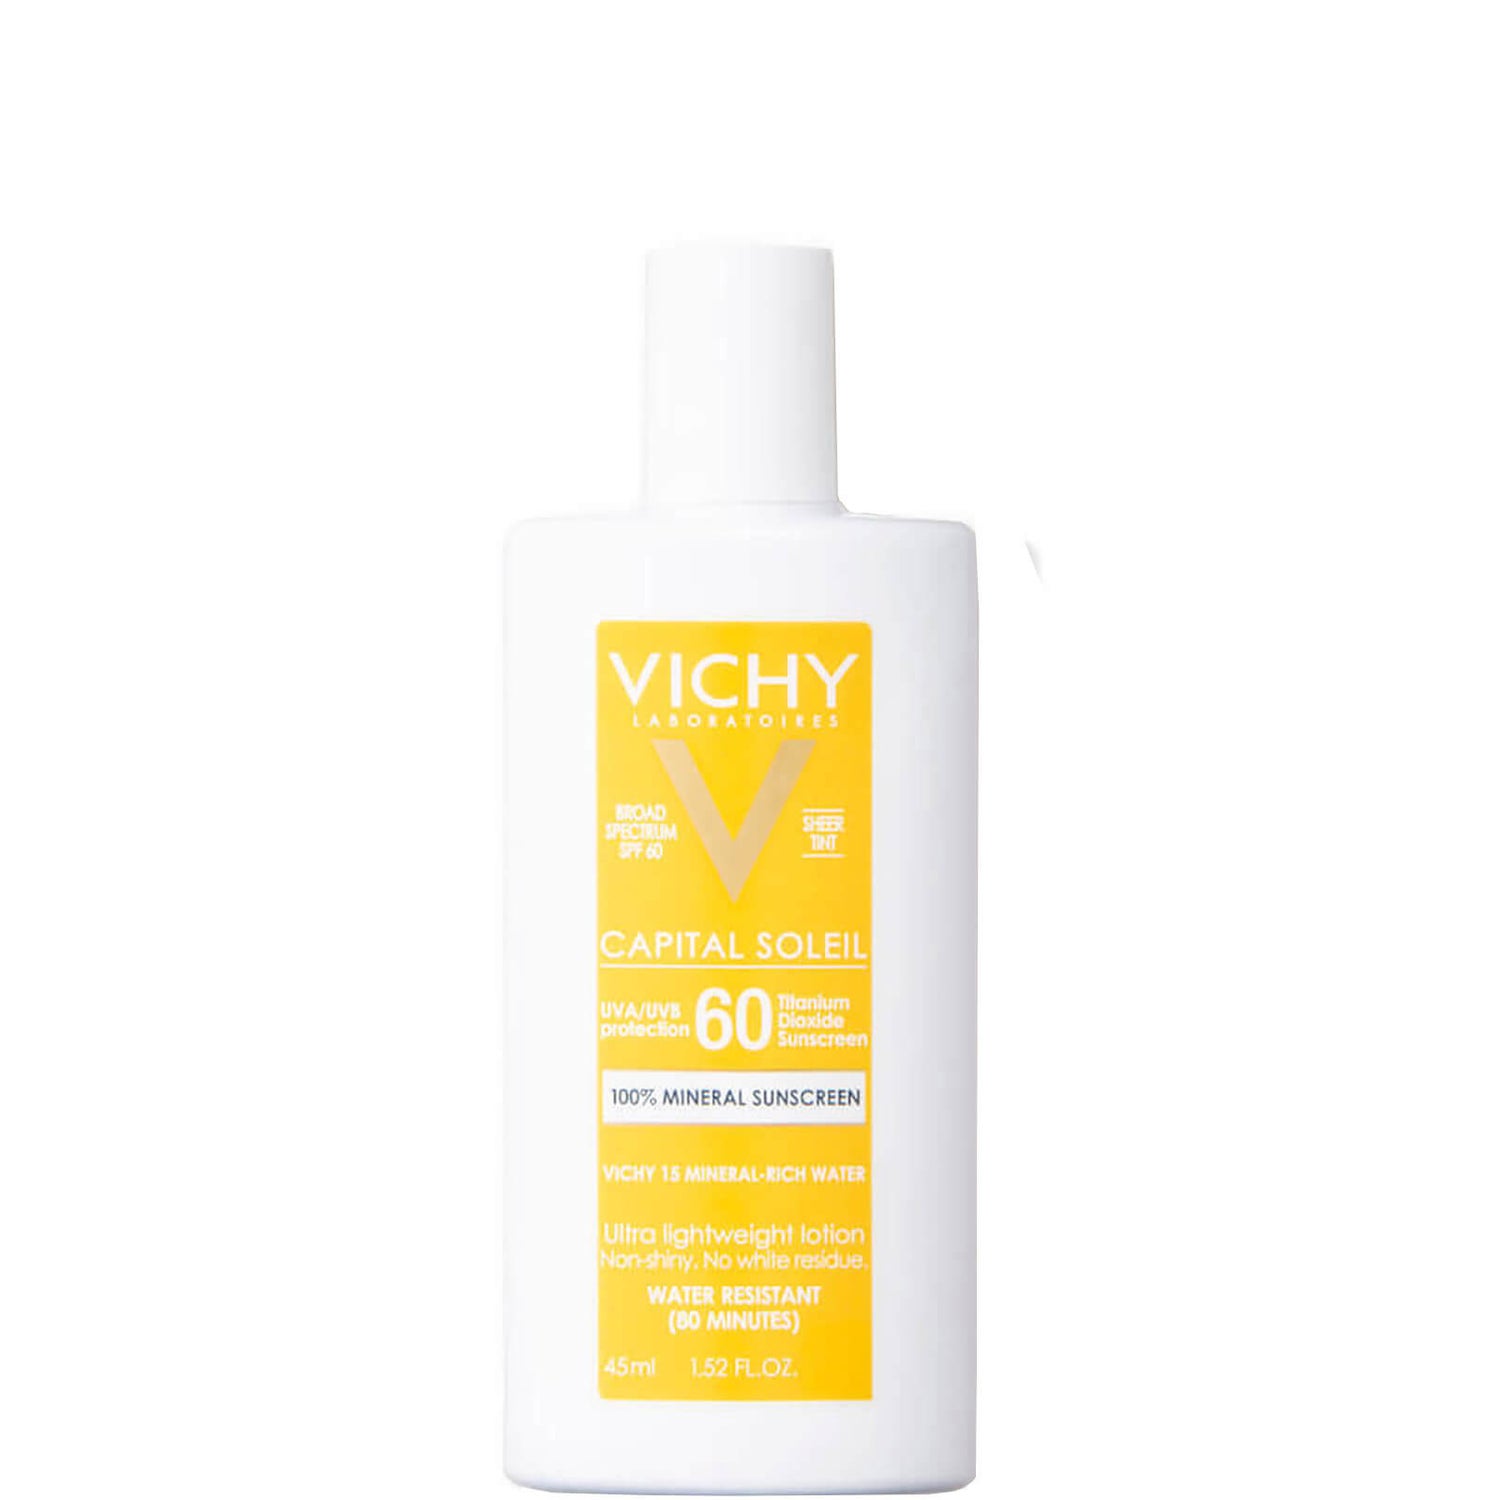 Vichy Capital Soleil Tinted Mineral Sunscreen for Face SPF60